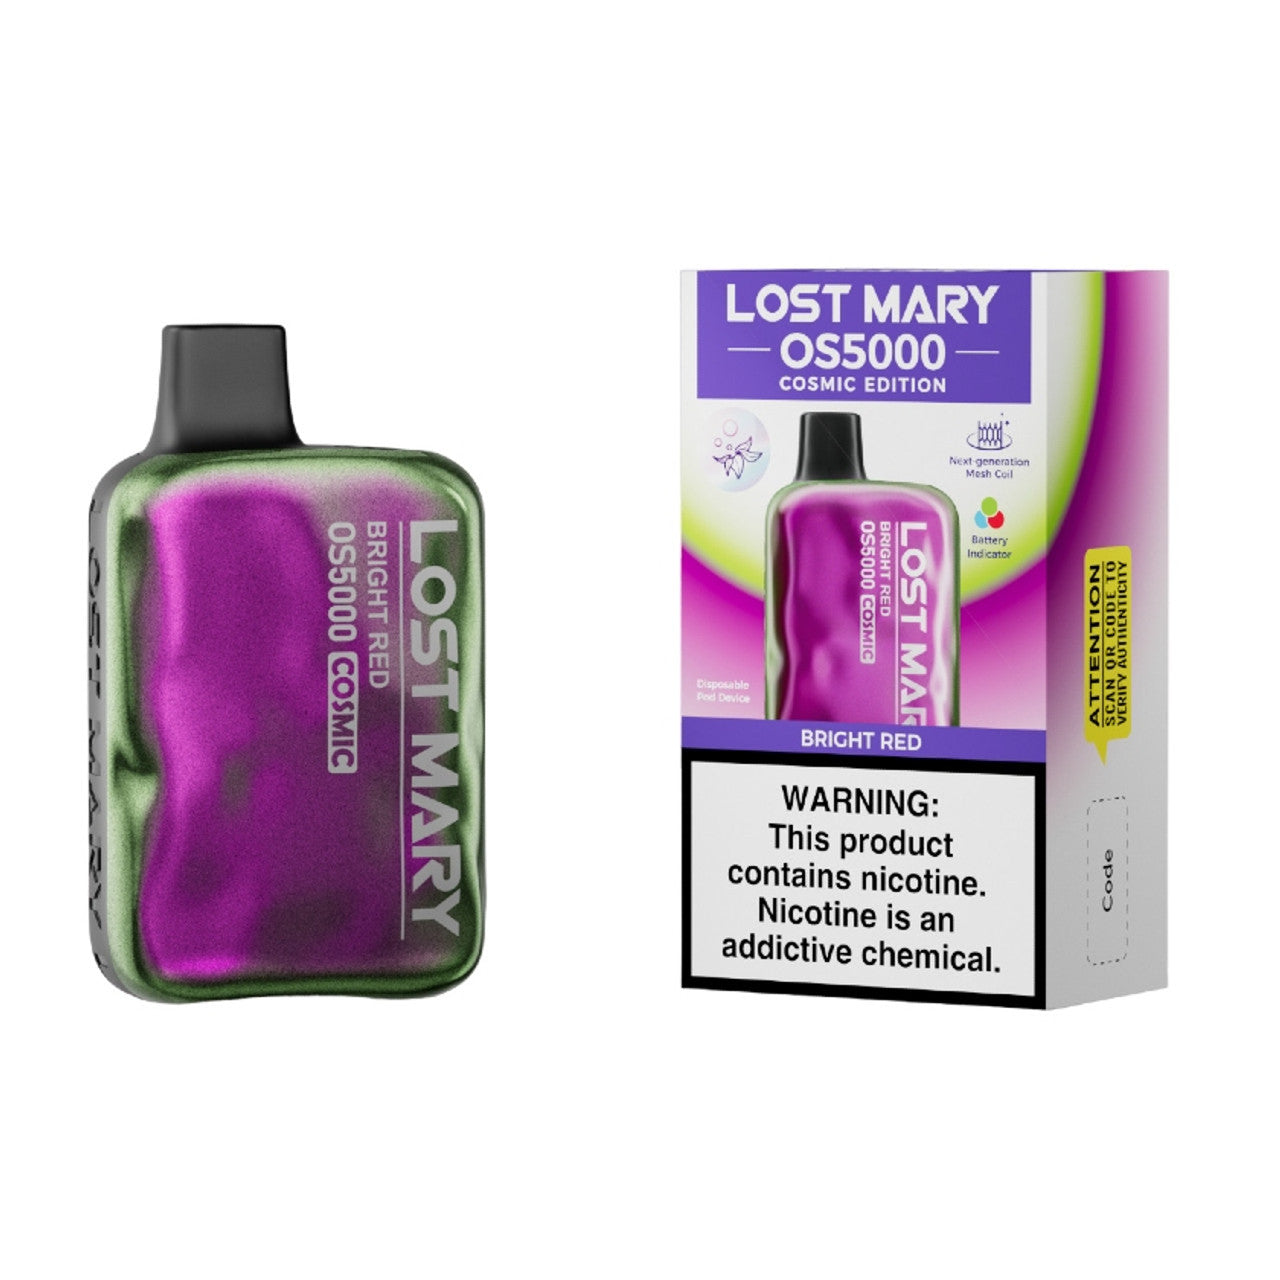 Lost-Mary-OS5000-Cosmic-Edition-Bright-Red-1280x1280-JPG